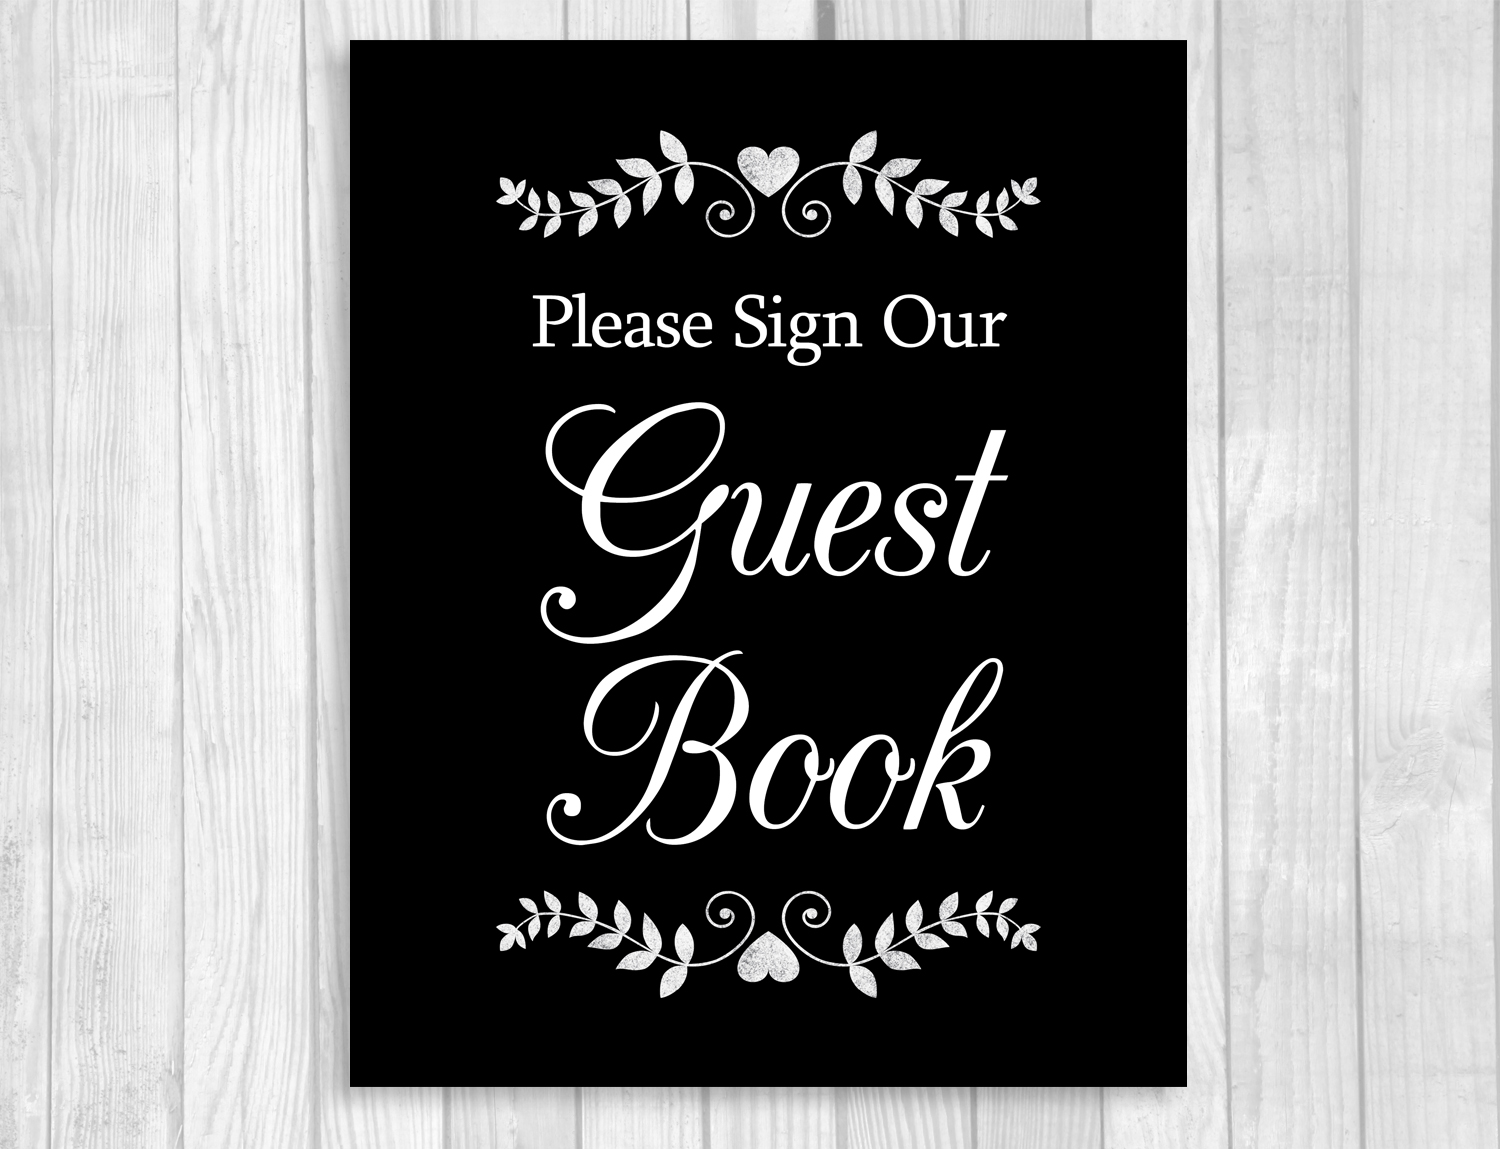 Please Sign our Guest Book or Please Sign Our Guest Board 8x10